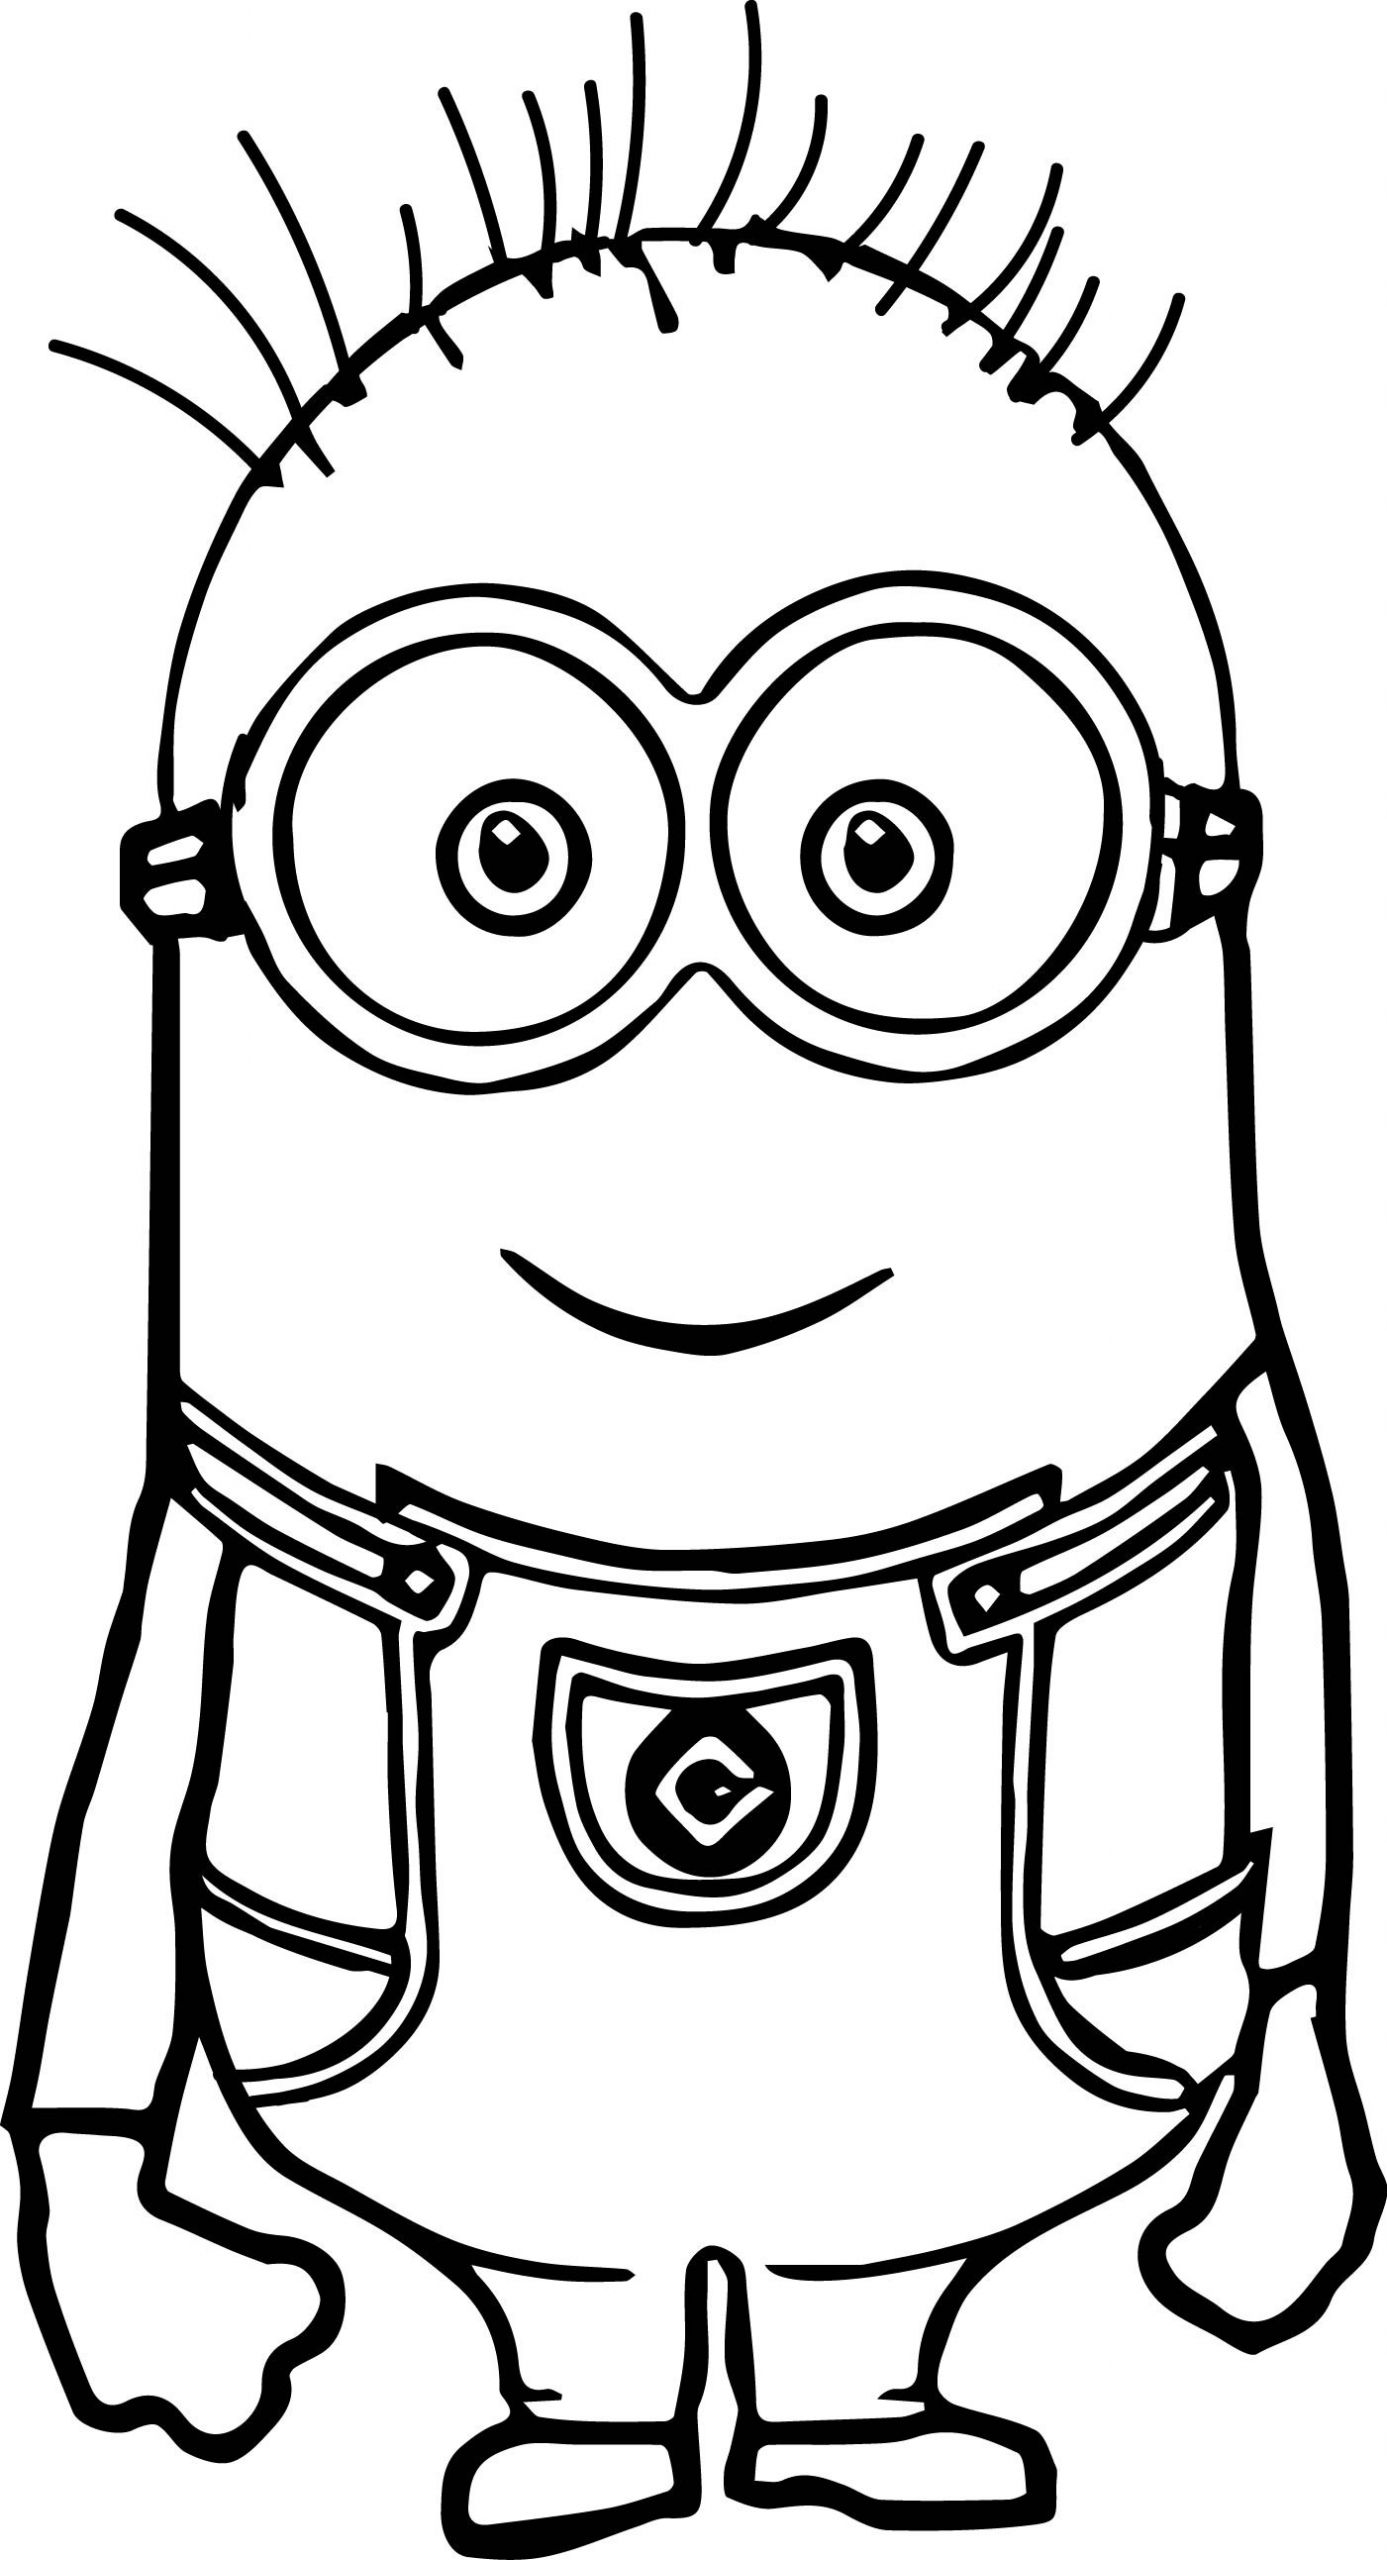 Coloring Pages For Kids Minions
 Minion Coloring Pages